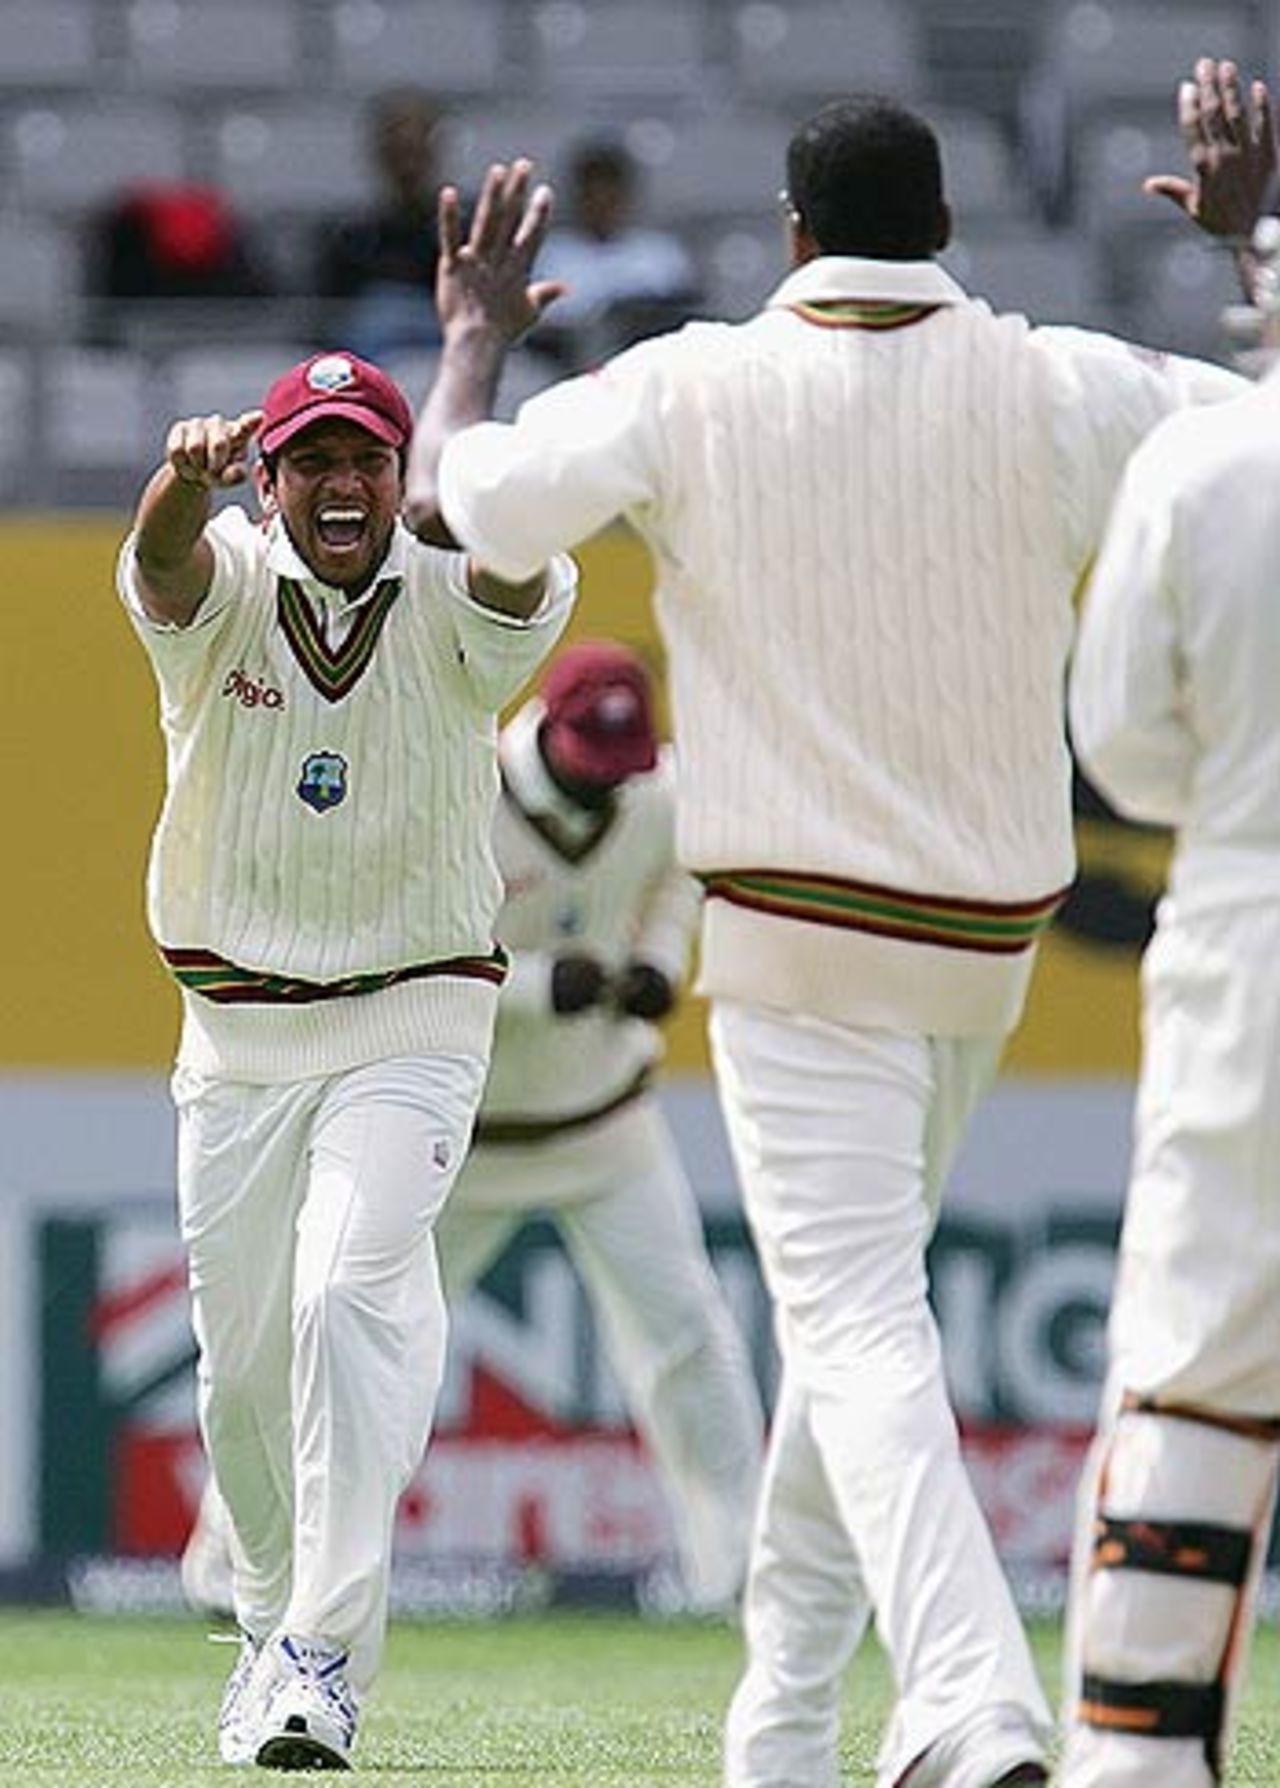 Ramnaresh Sarwan and Chris Gayle are ecstatic after breaking a crucial partnership, New Zealand v West Indies, 1st Test, Auckland, 3rd day, March 11 2006